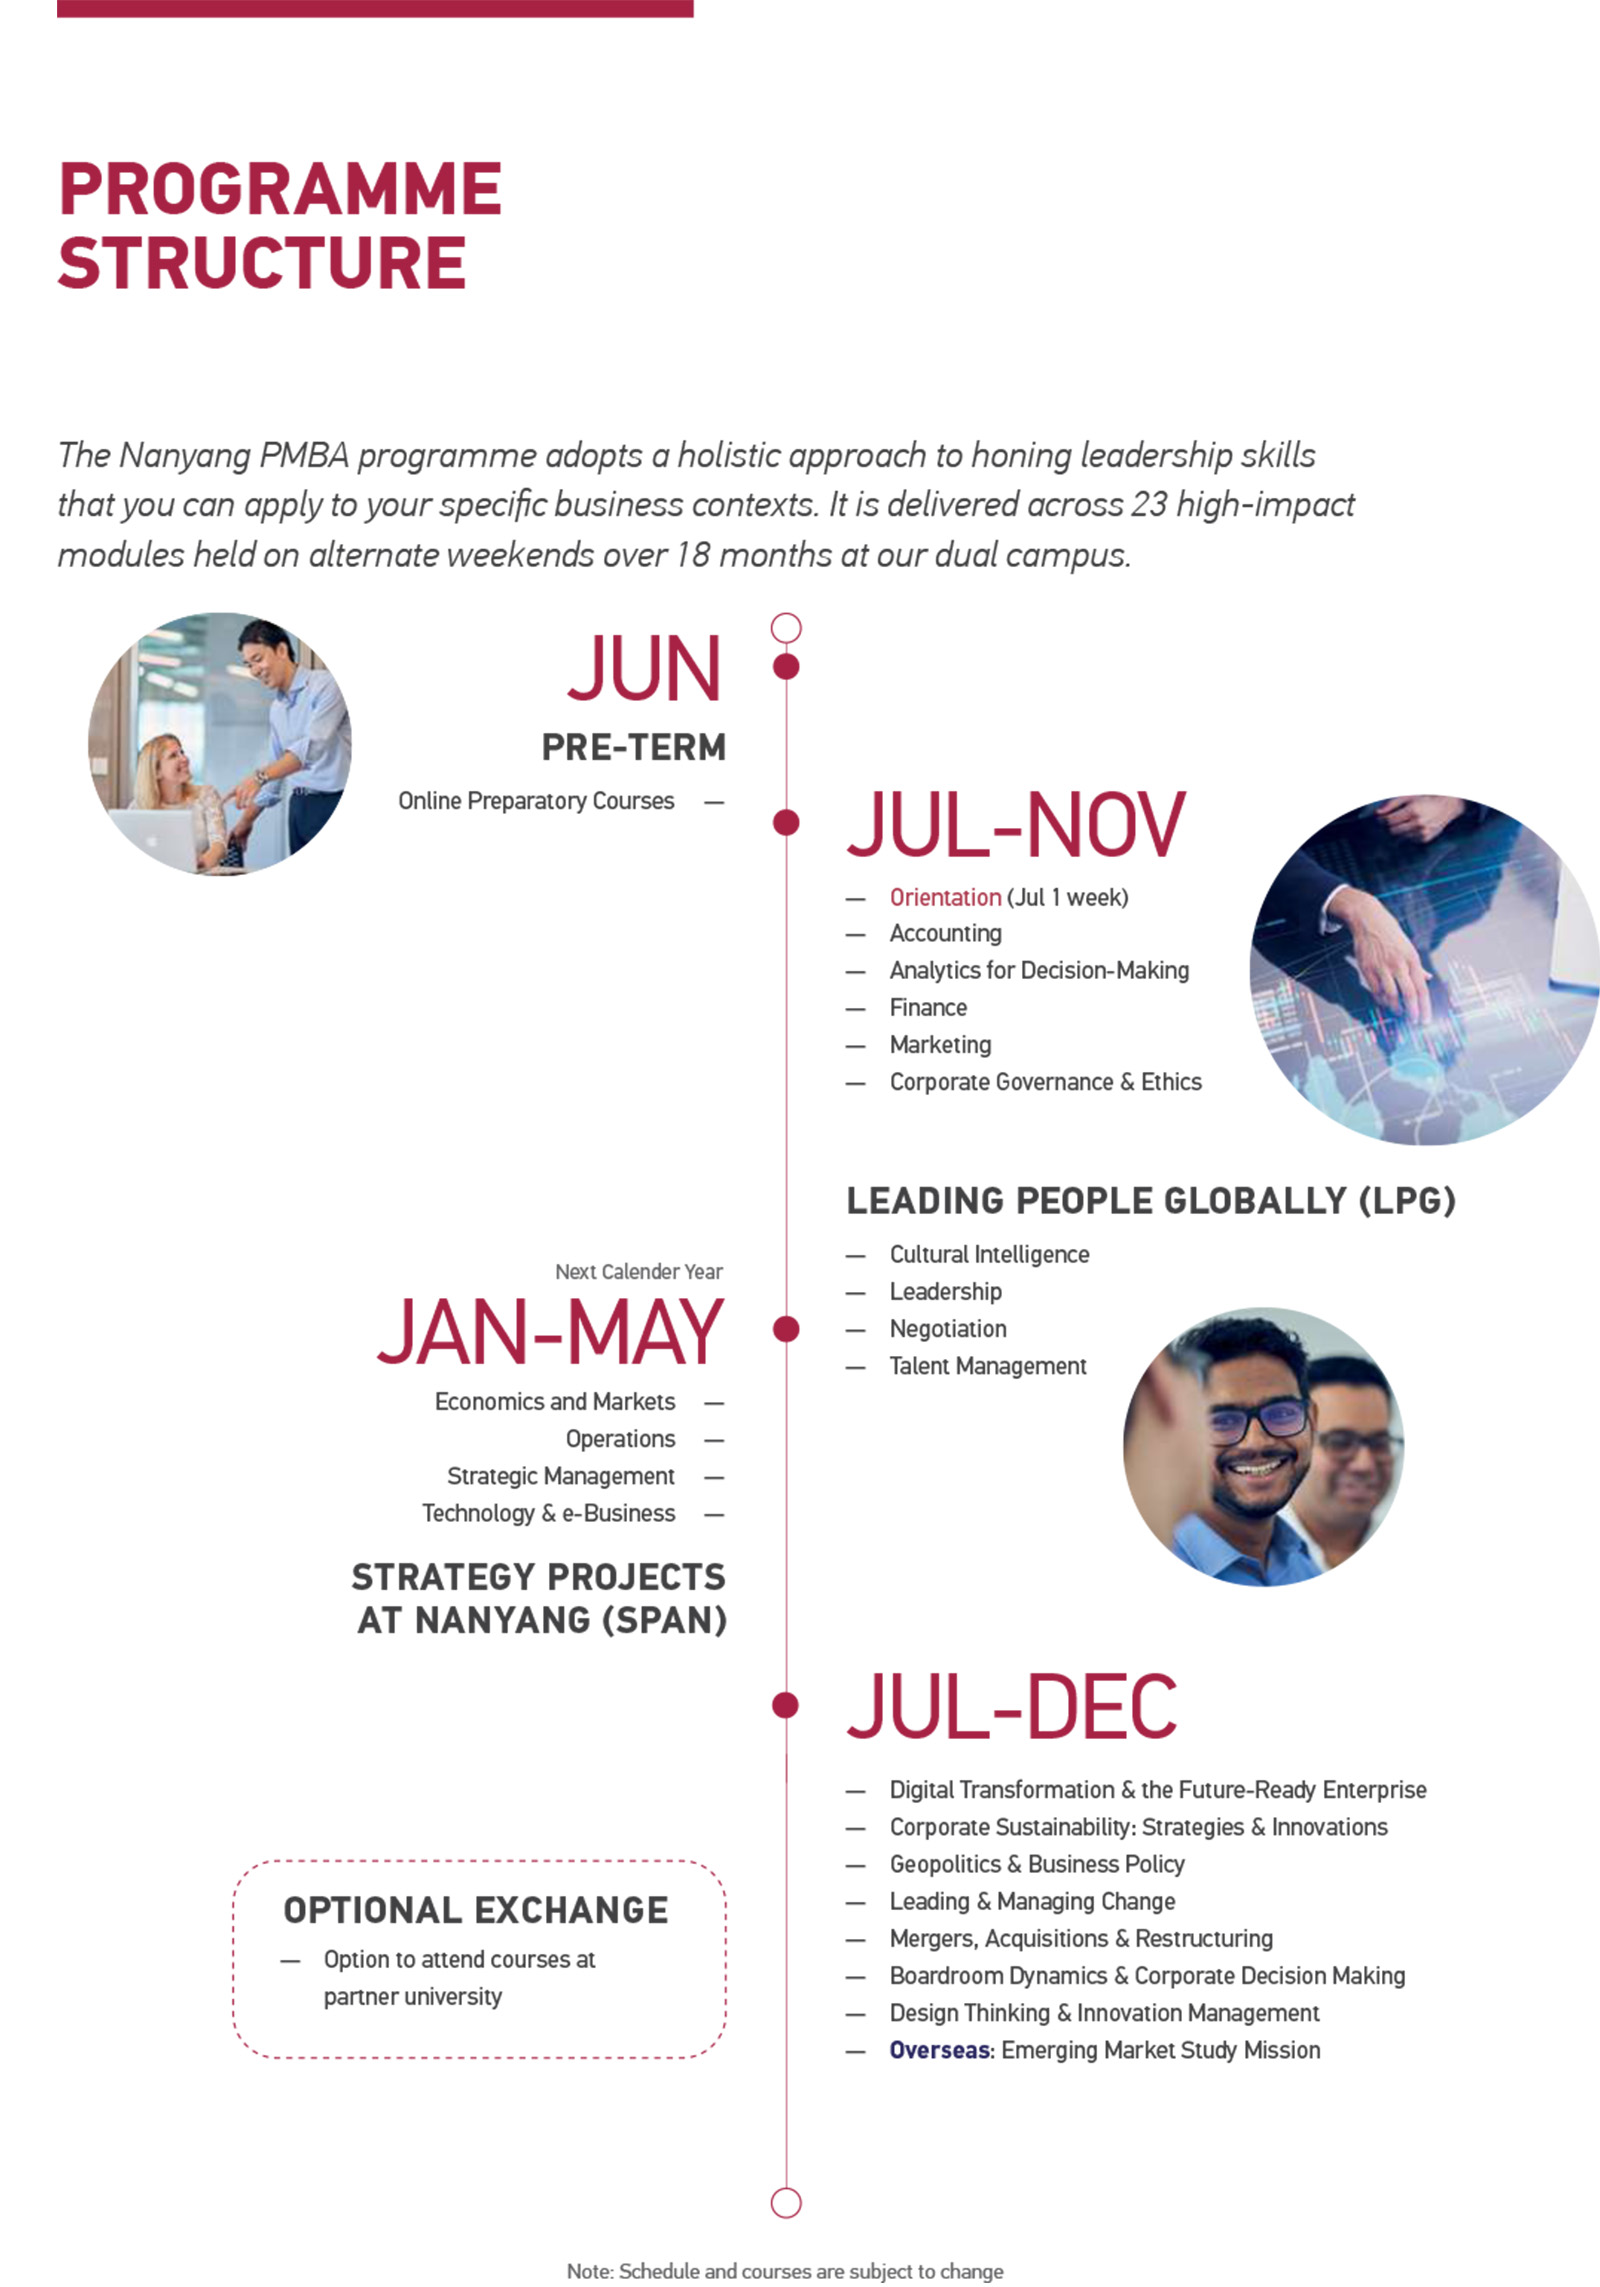 Infographic: Programme schedule for Nanyang Professional MBA, Nanyang Business School, Singapore